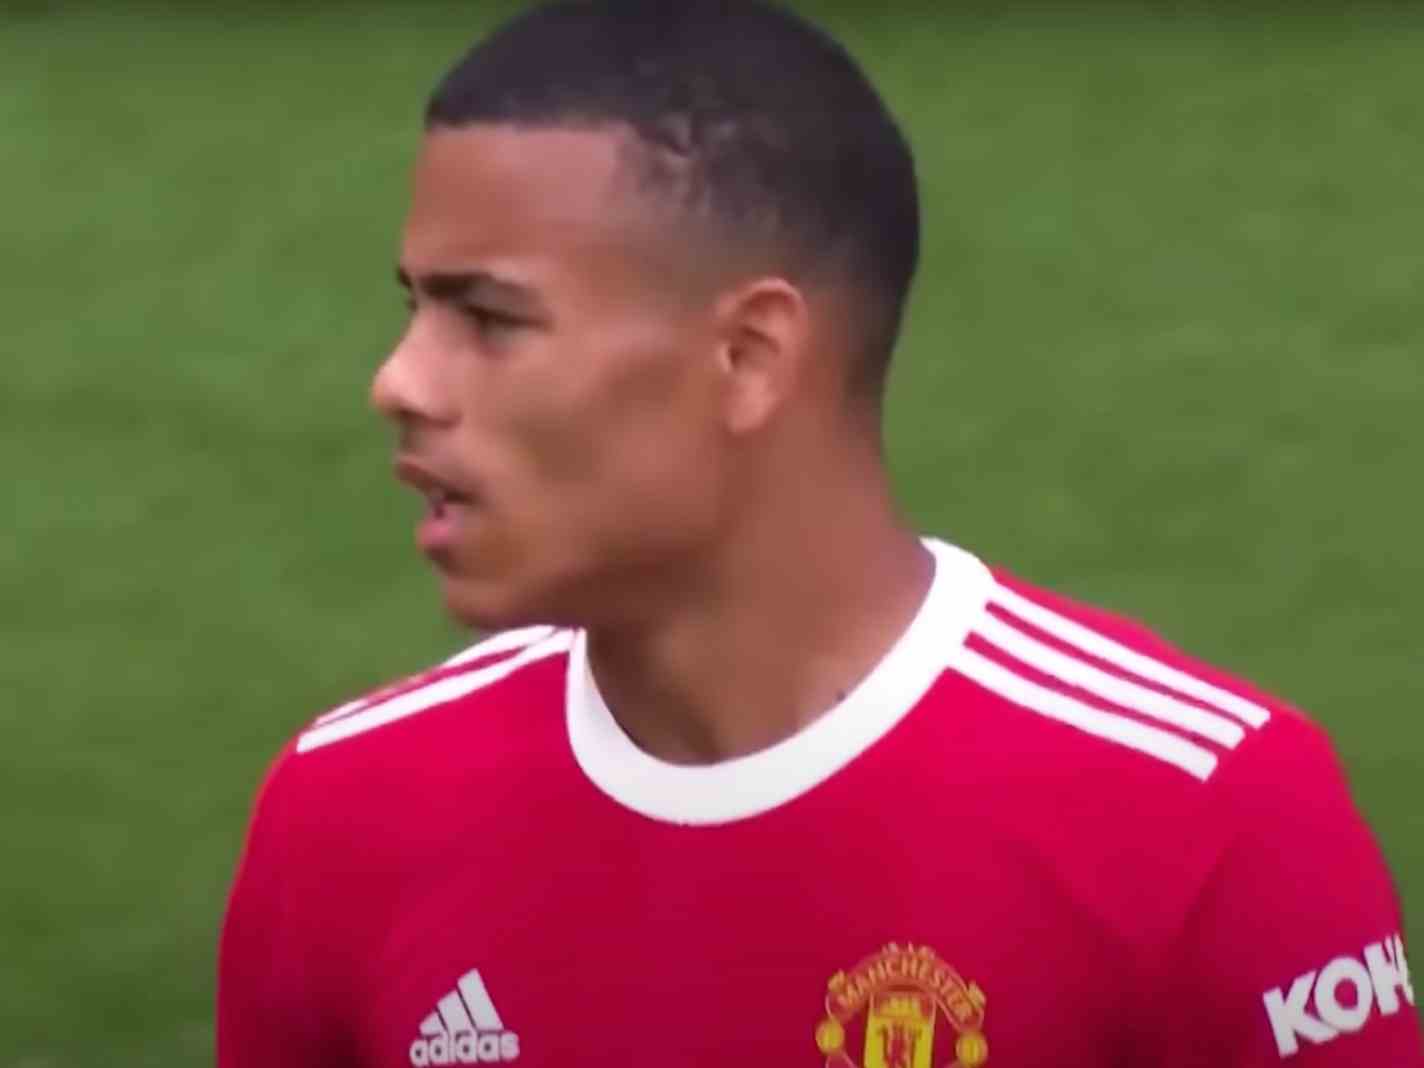 Mason Greenwood: What Happened After His Arrest And Where Is He Now?